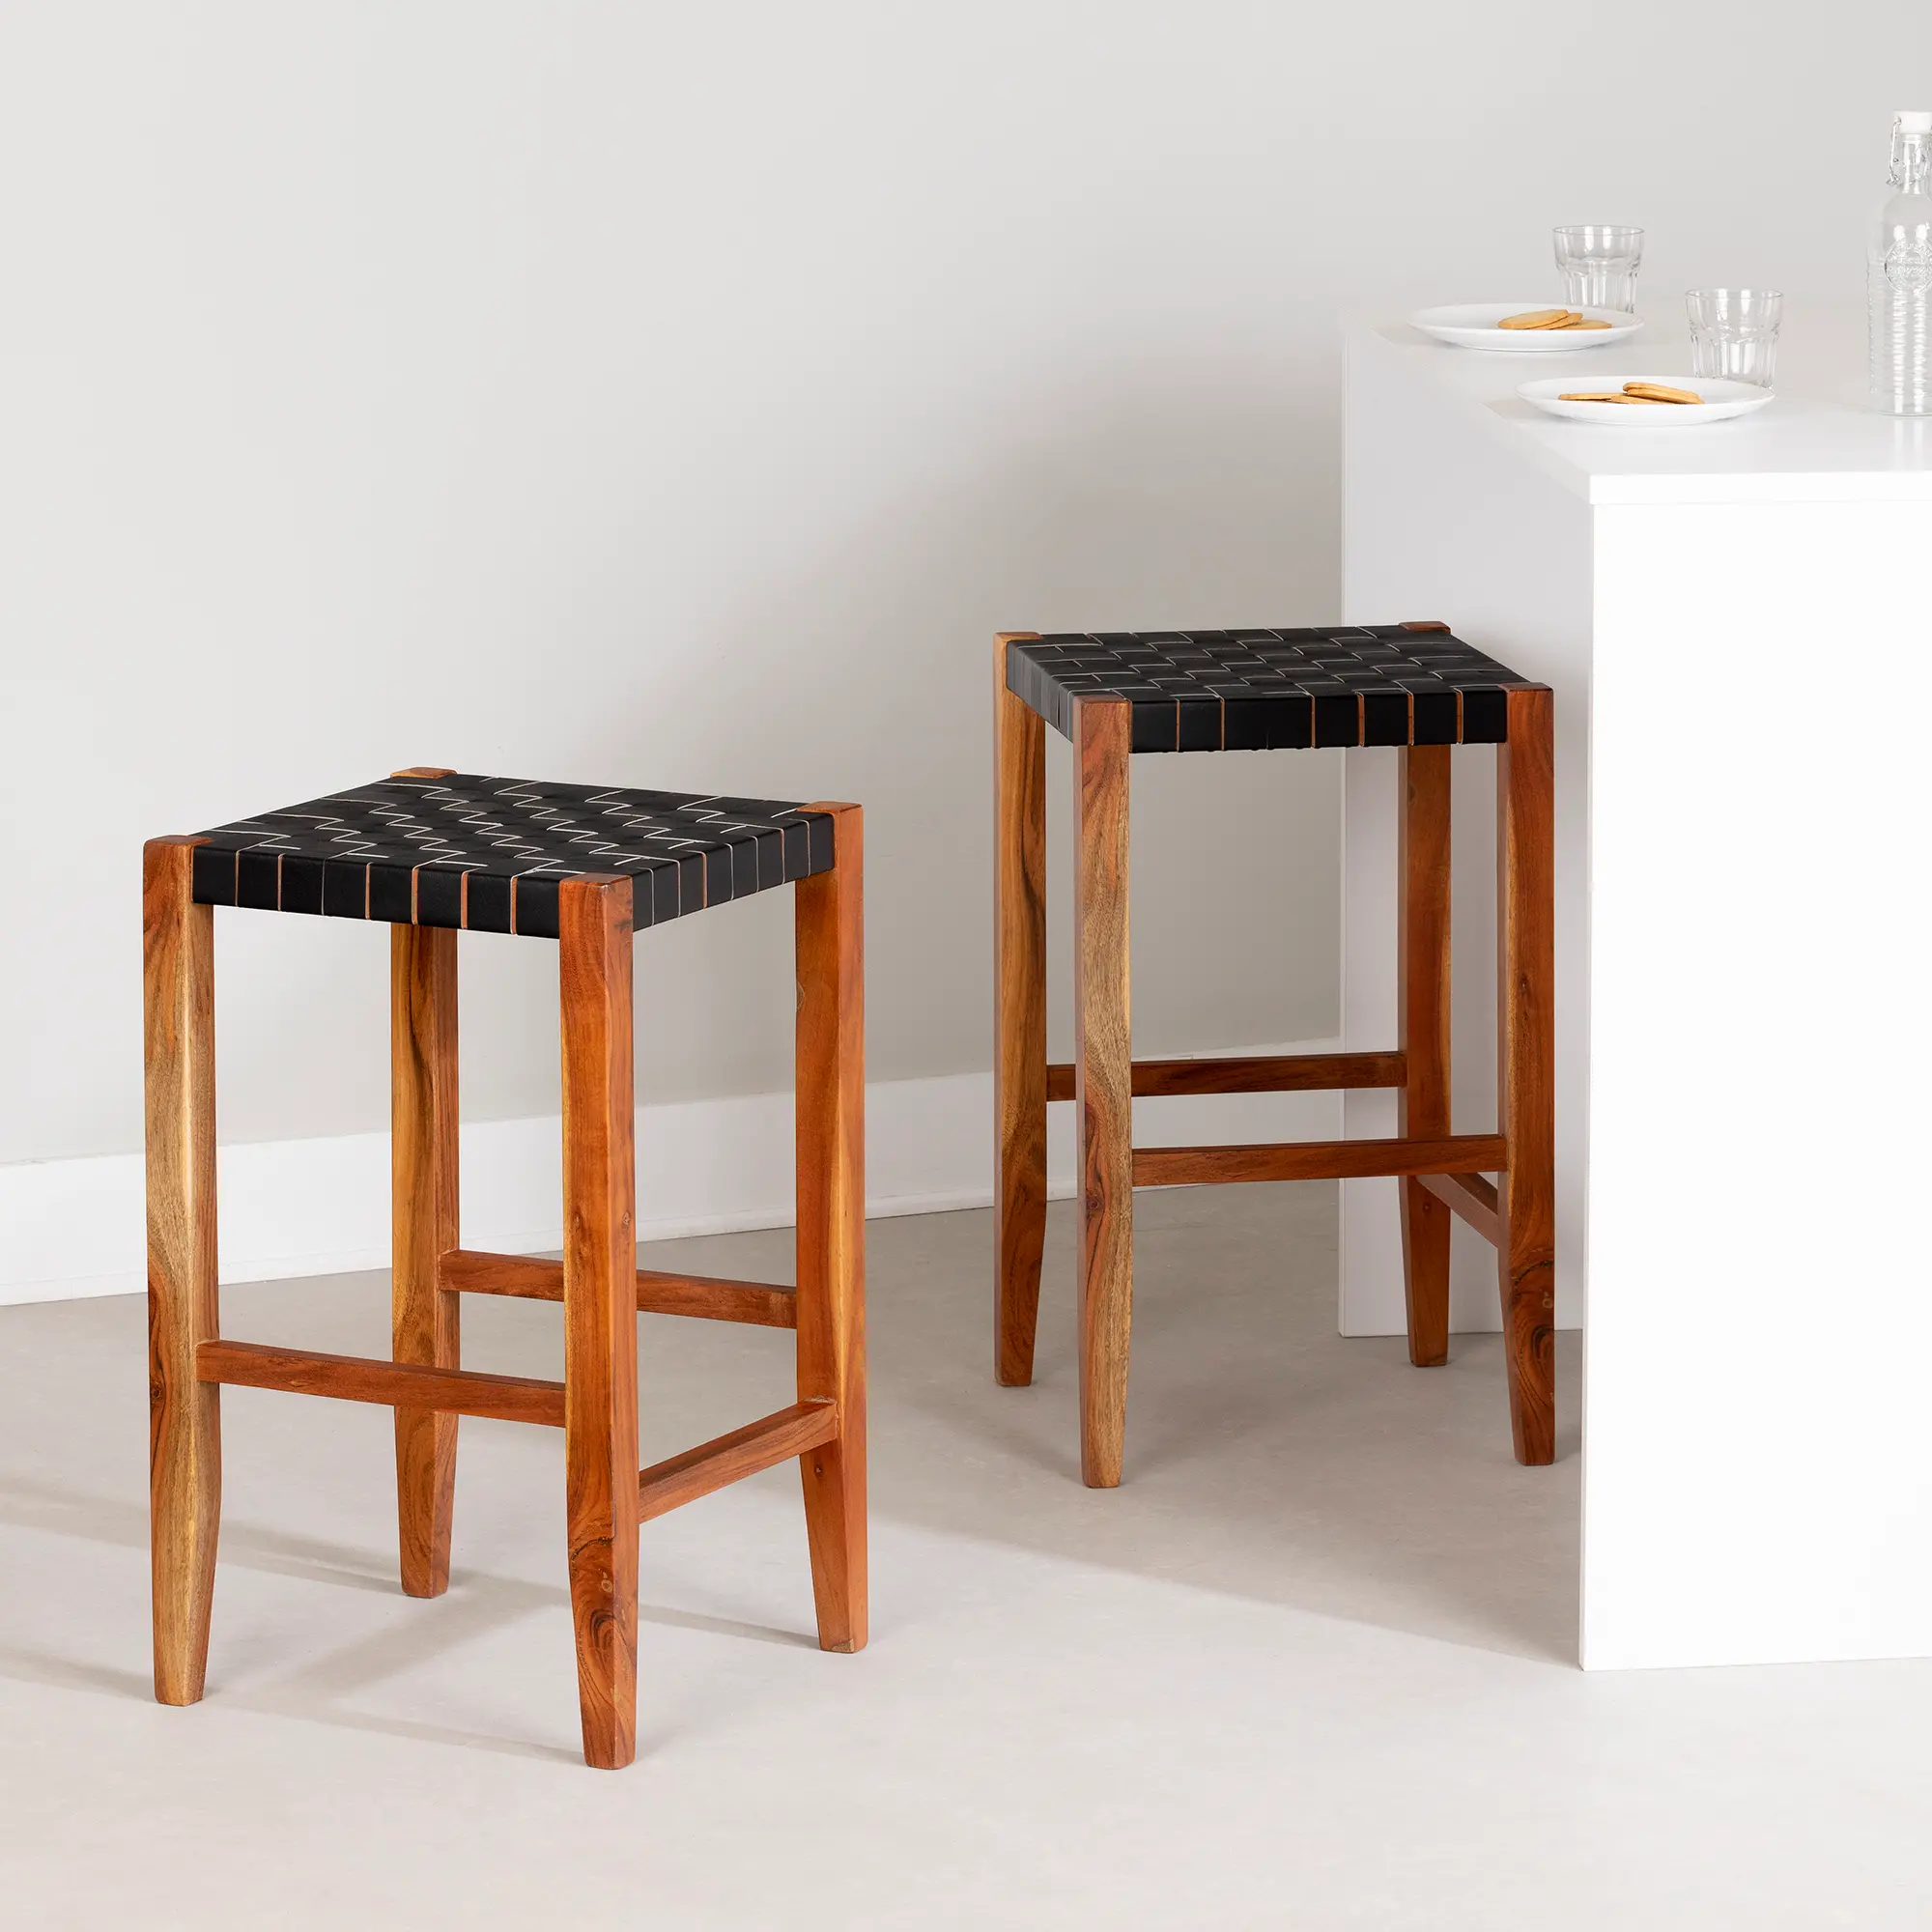 Balka Woven Black Leather Counter Stool, Set of 2